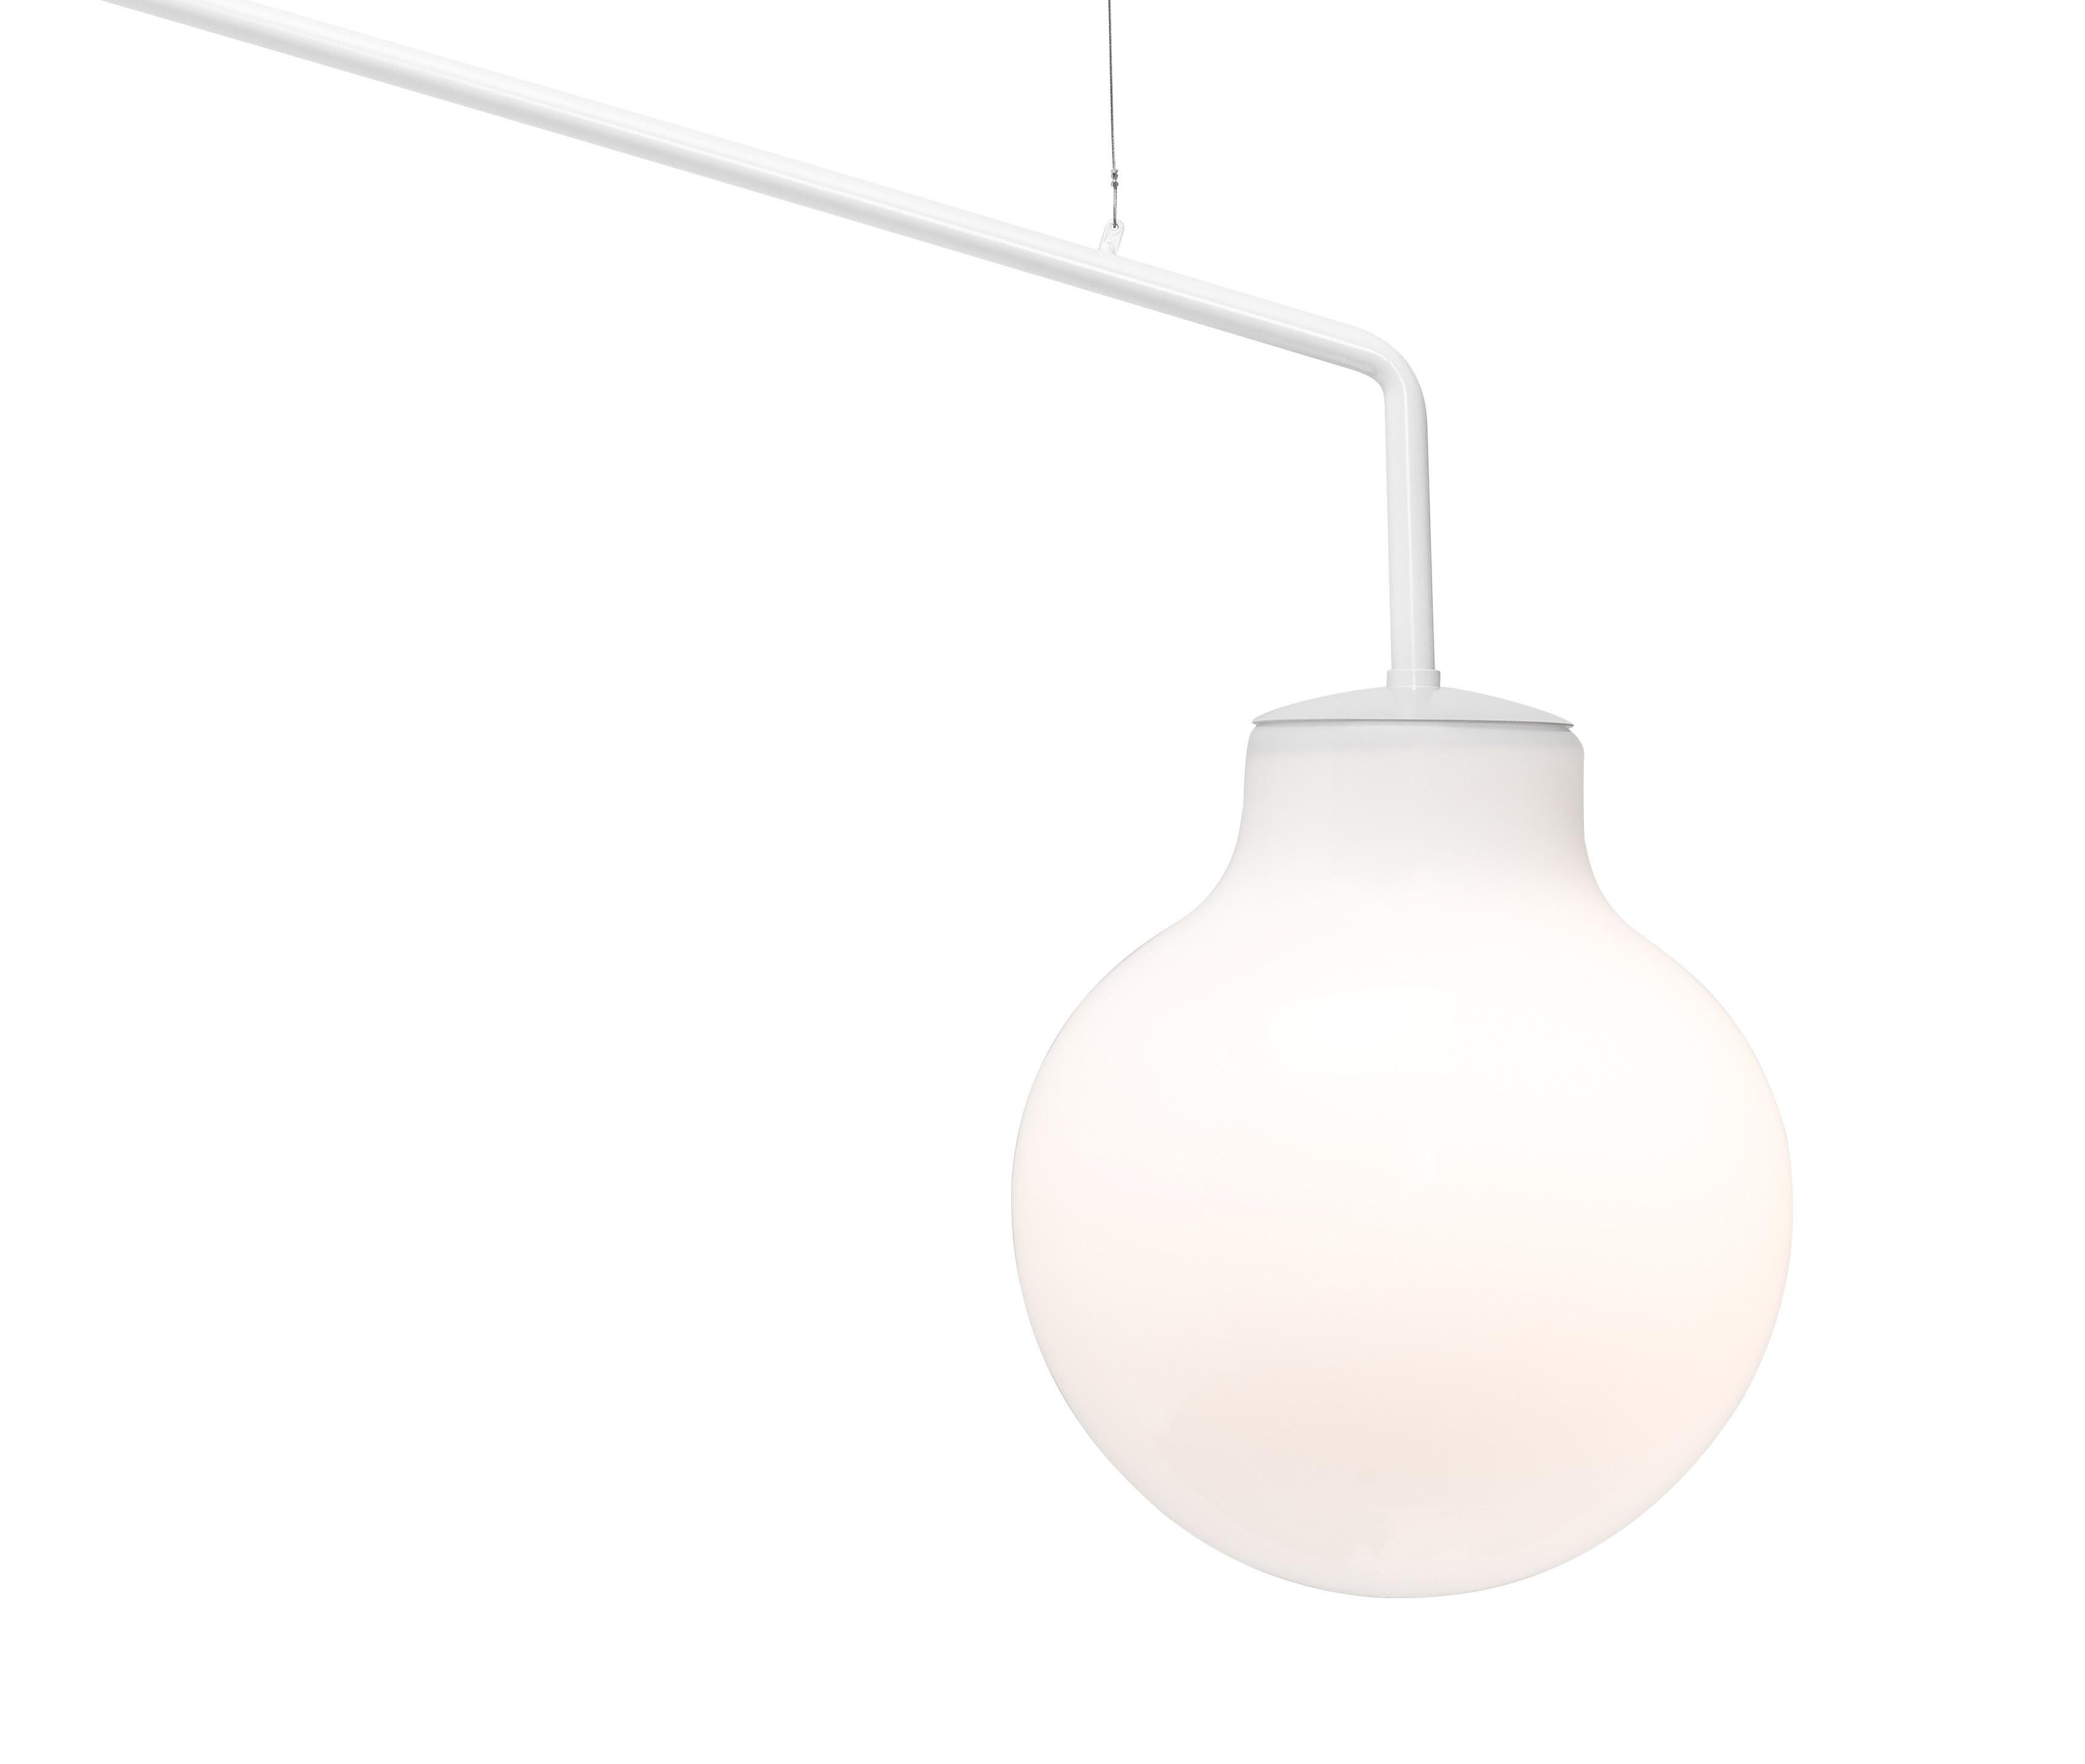 GA15 is a classical globe luminaire, save for the fact that it is a wall luminaire. The fitting consists of a mouthblown, three layered
opaque glass attached to a bent steelrod which grows out from the wall.

The quality of the glass in